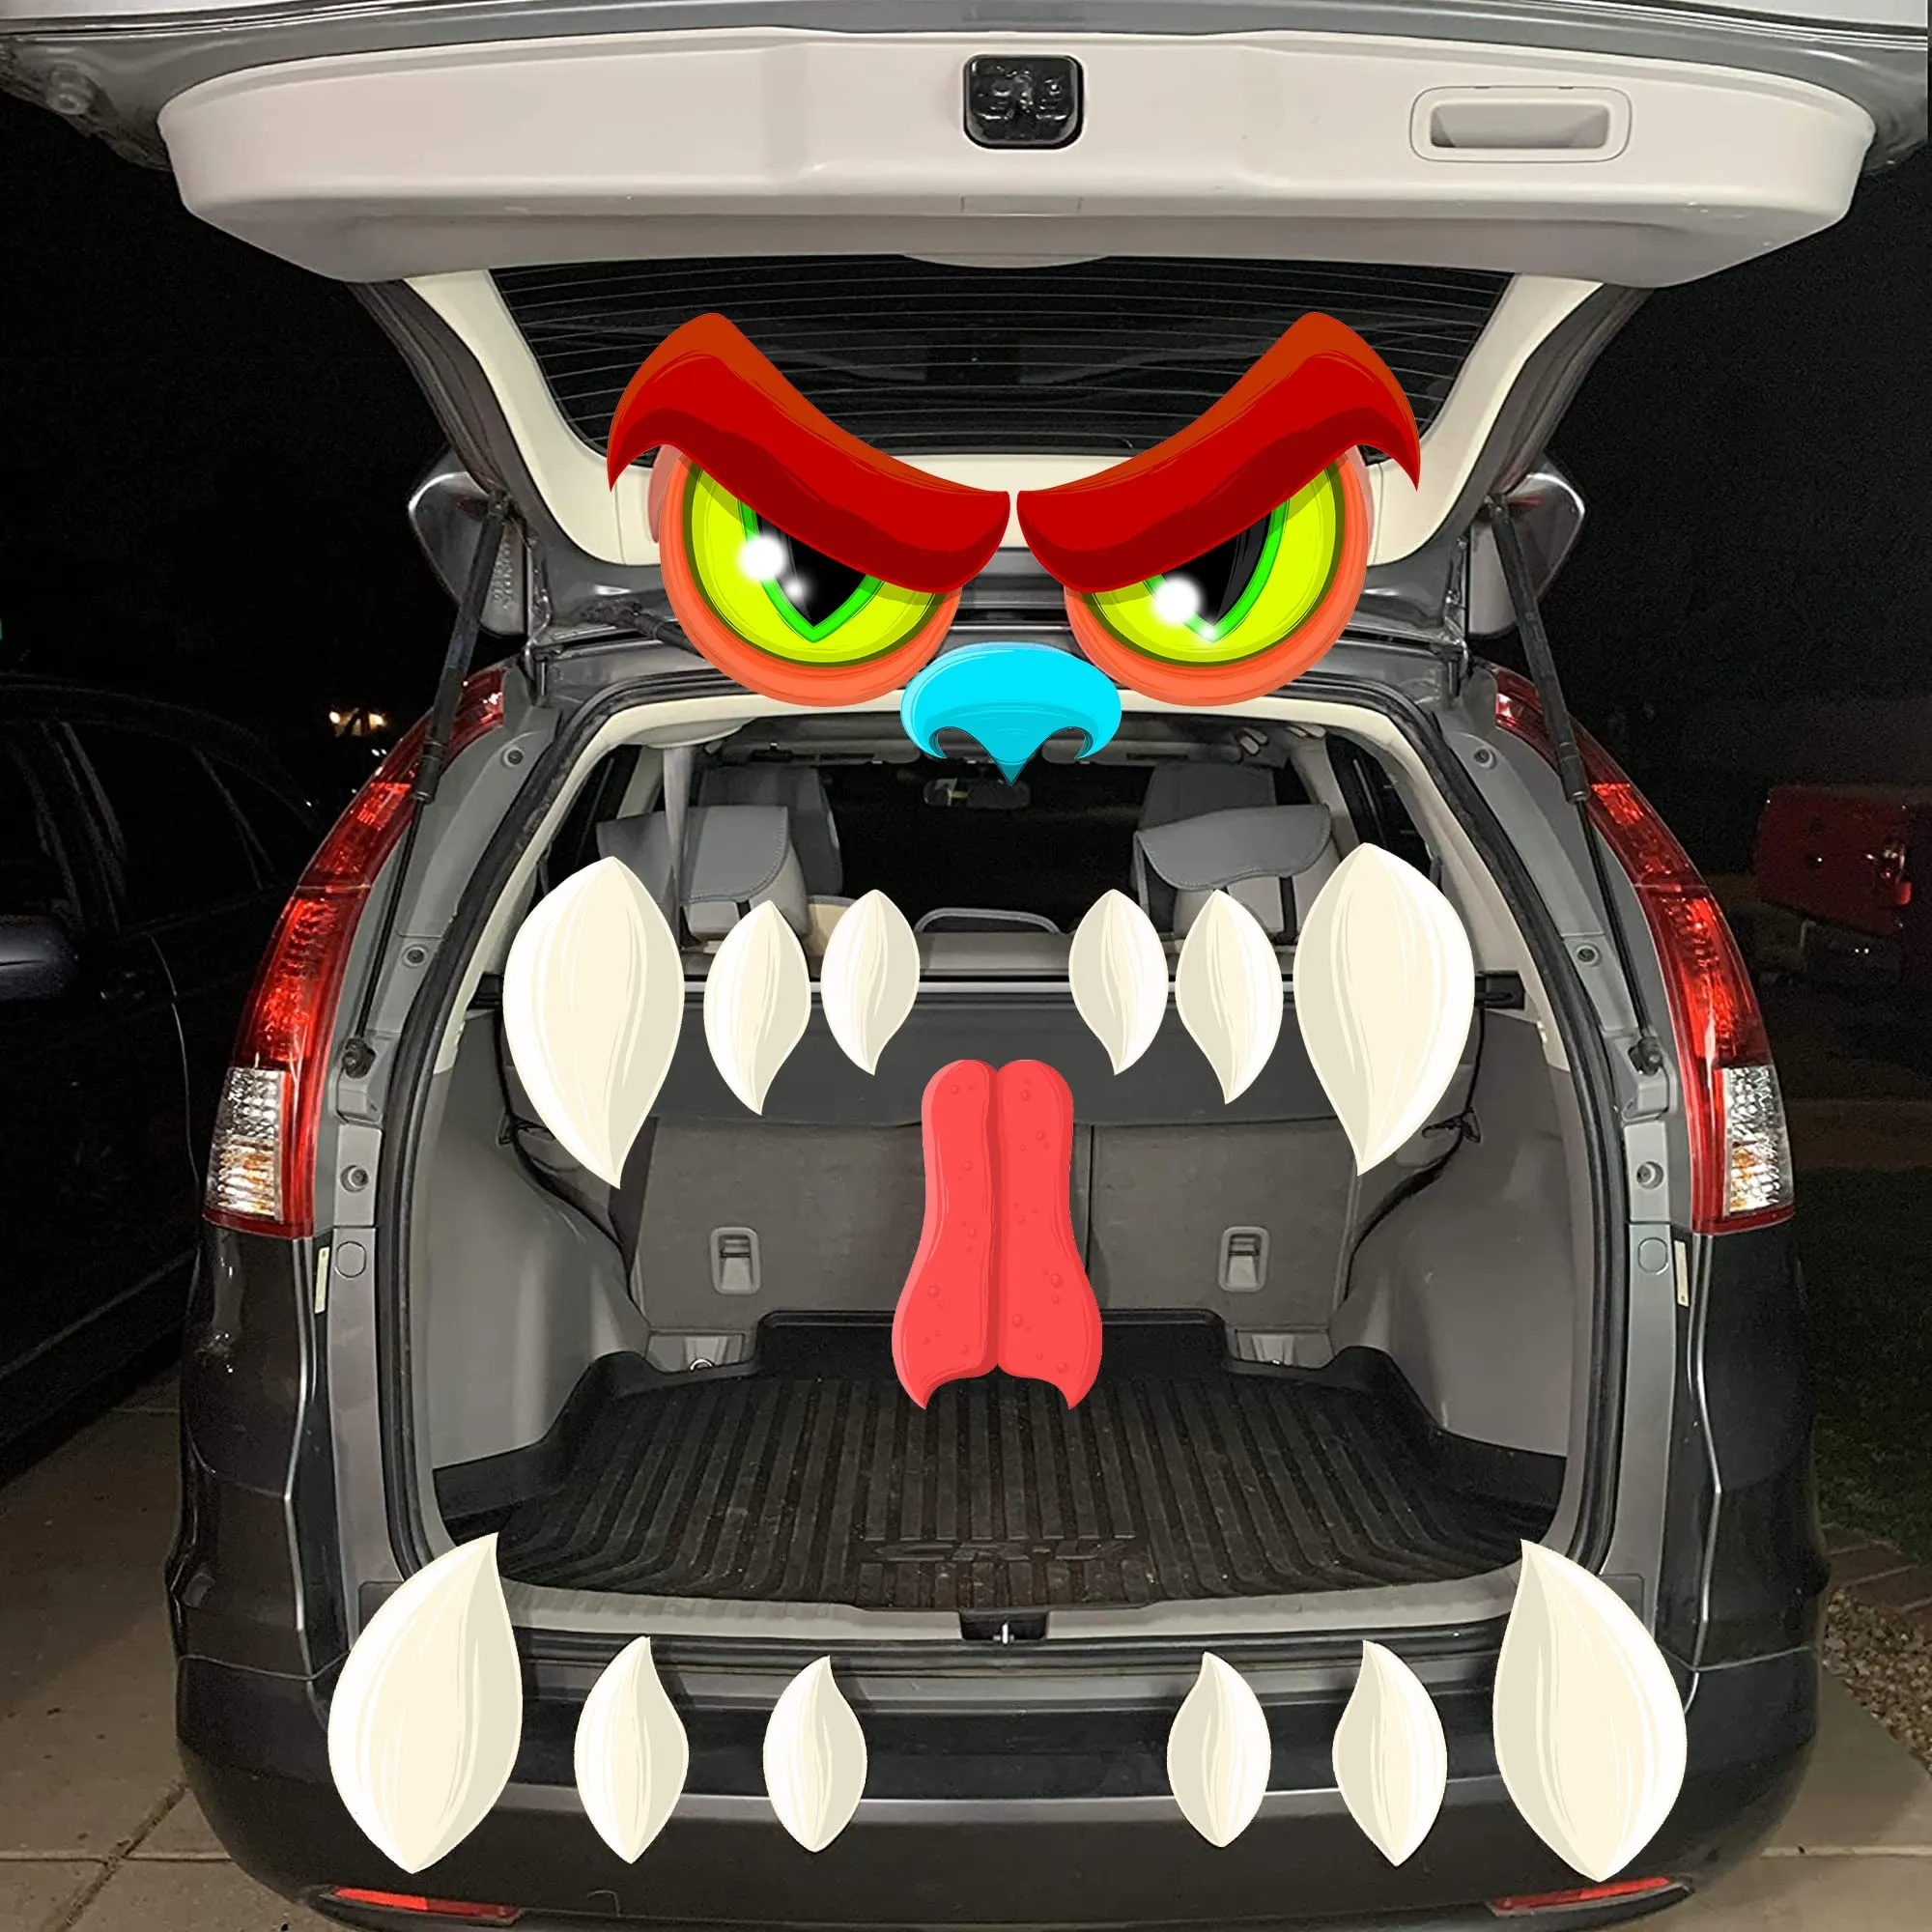 You are currently viewing Trunk or Treat Ideas for Trucks: Spook Up Your Vehicle for Halloween